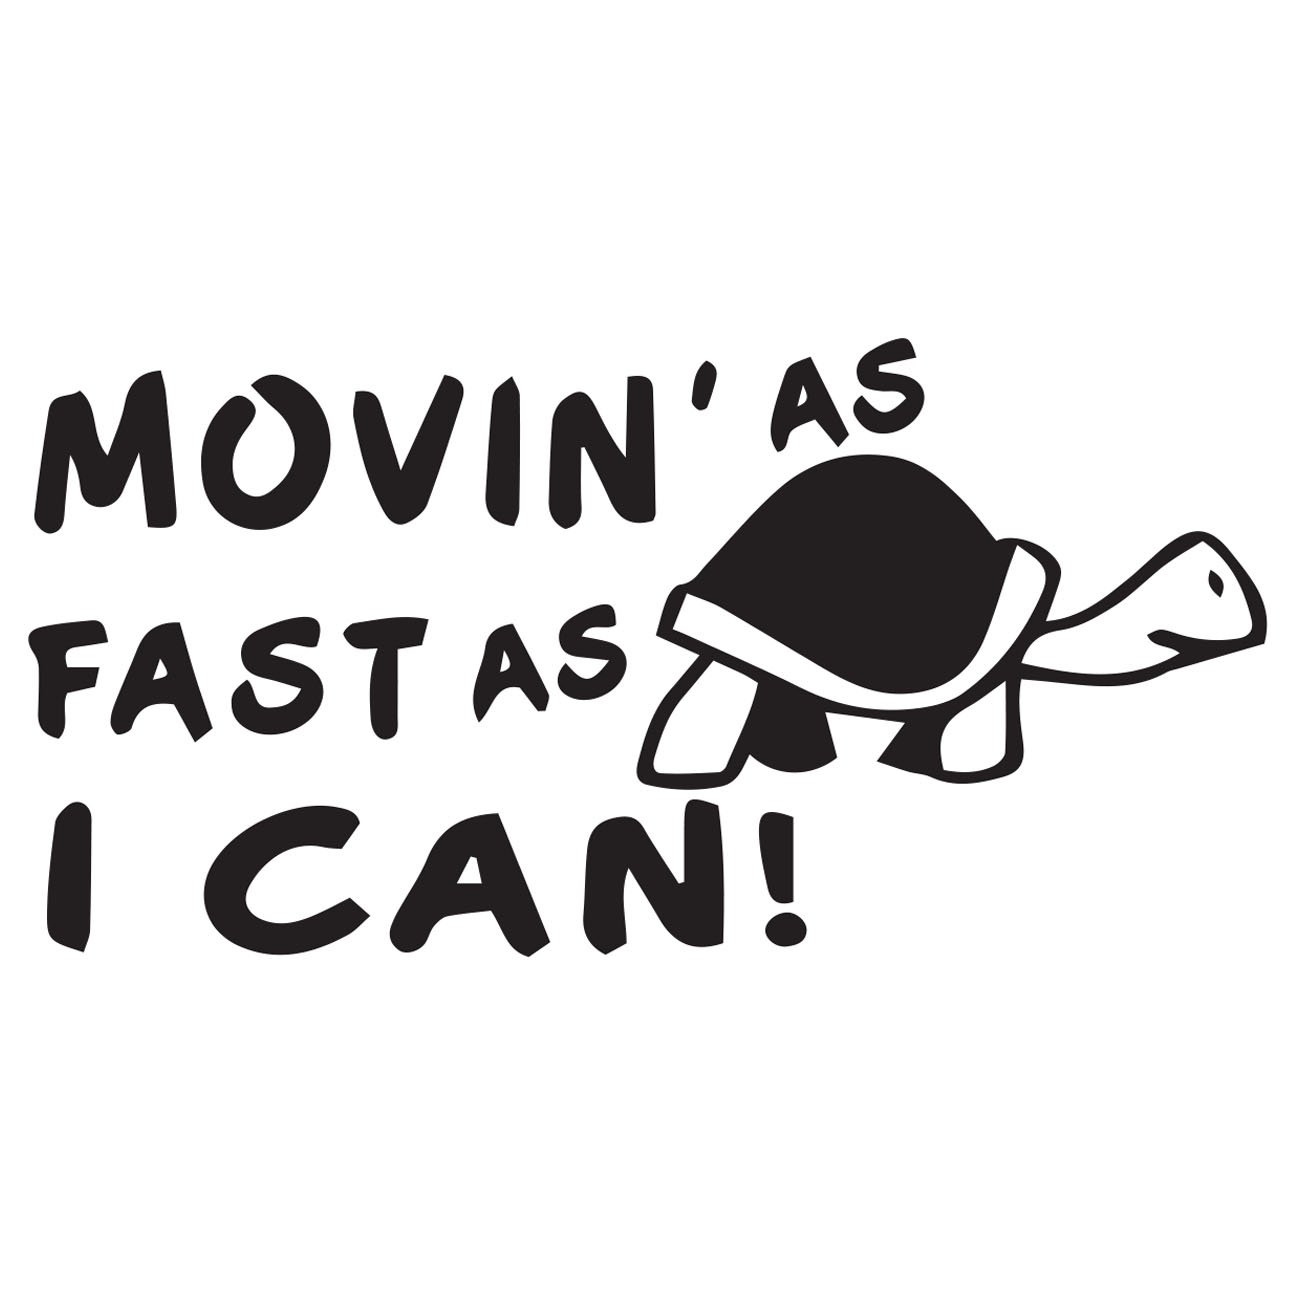 Movin as fast as i can - Turtle